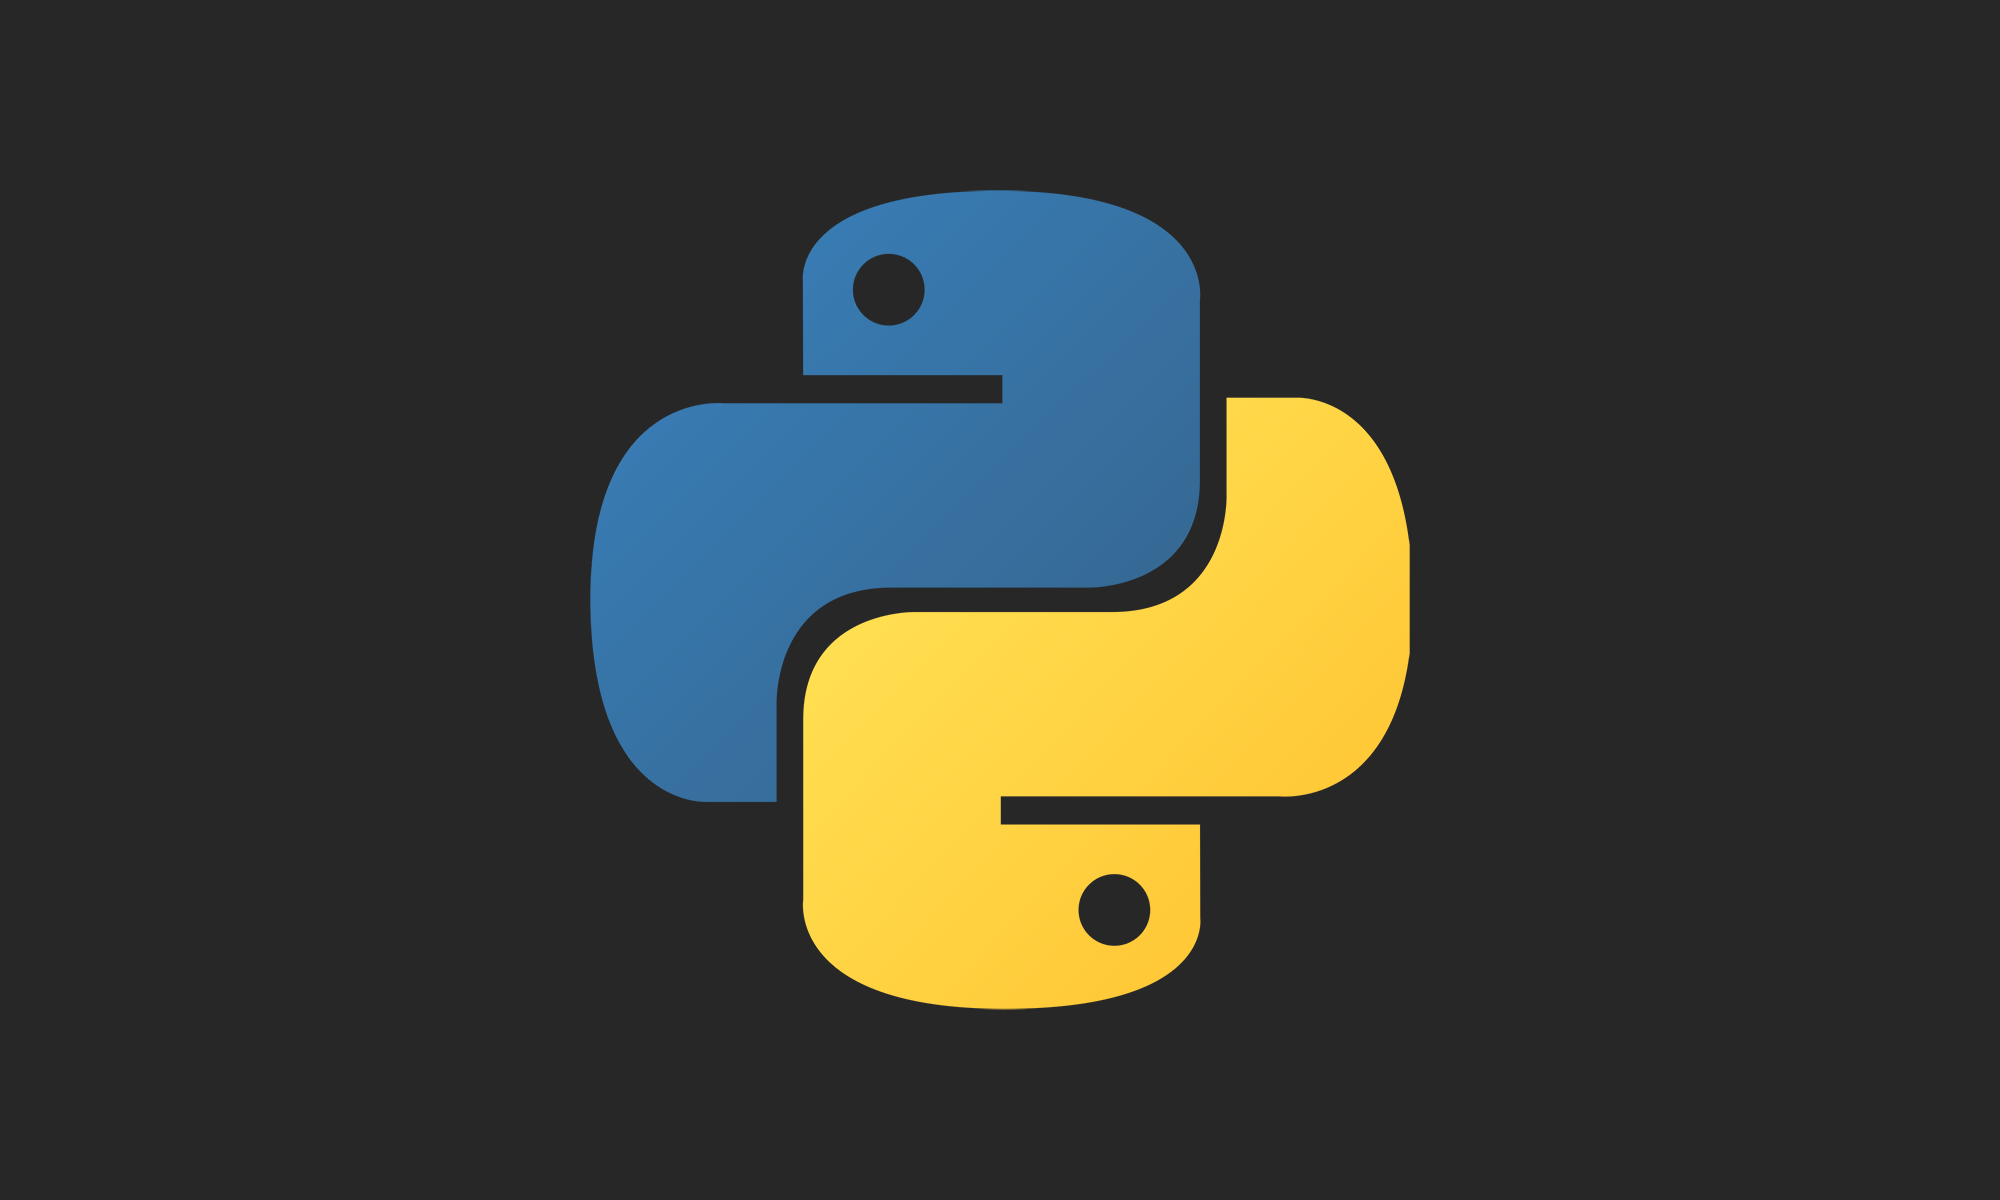 Concurrent HTTP requests in Python